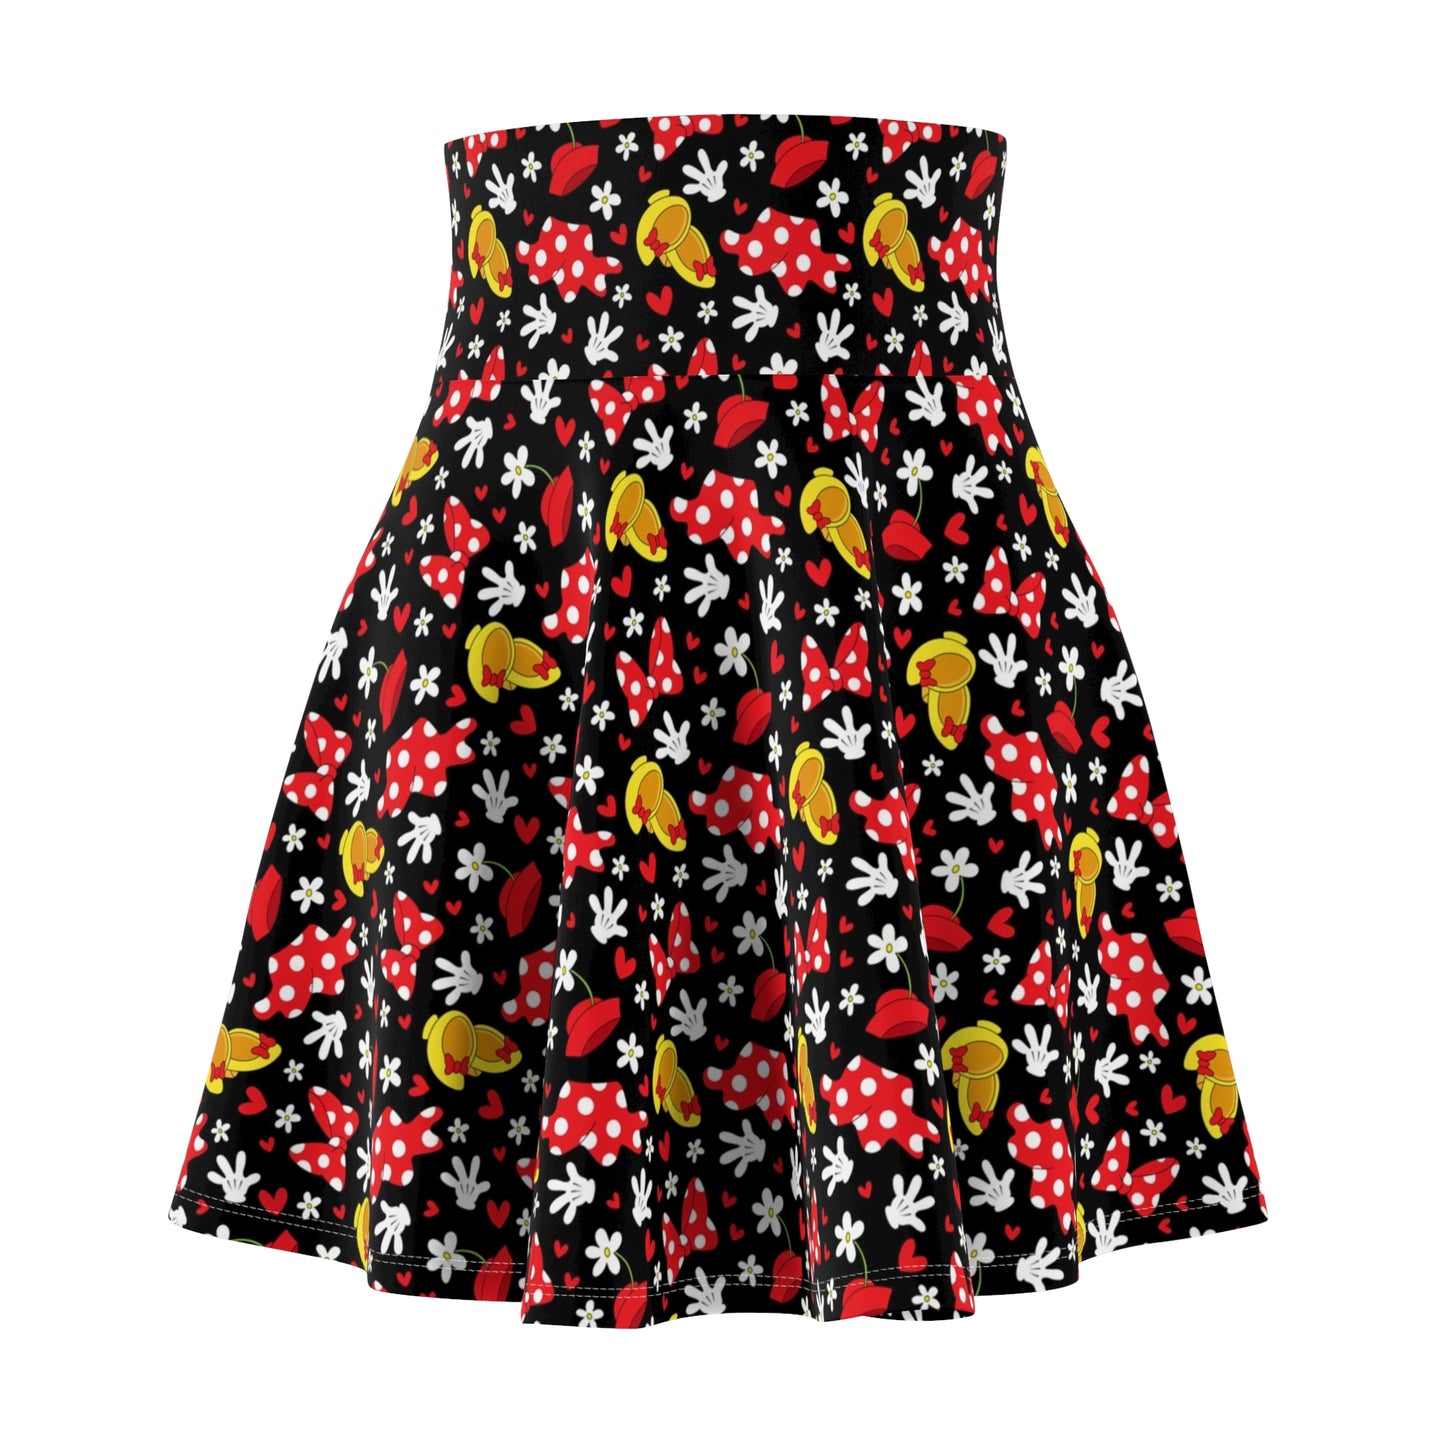 All About The Bows Women's Skater Skirt